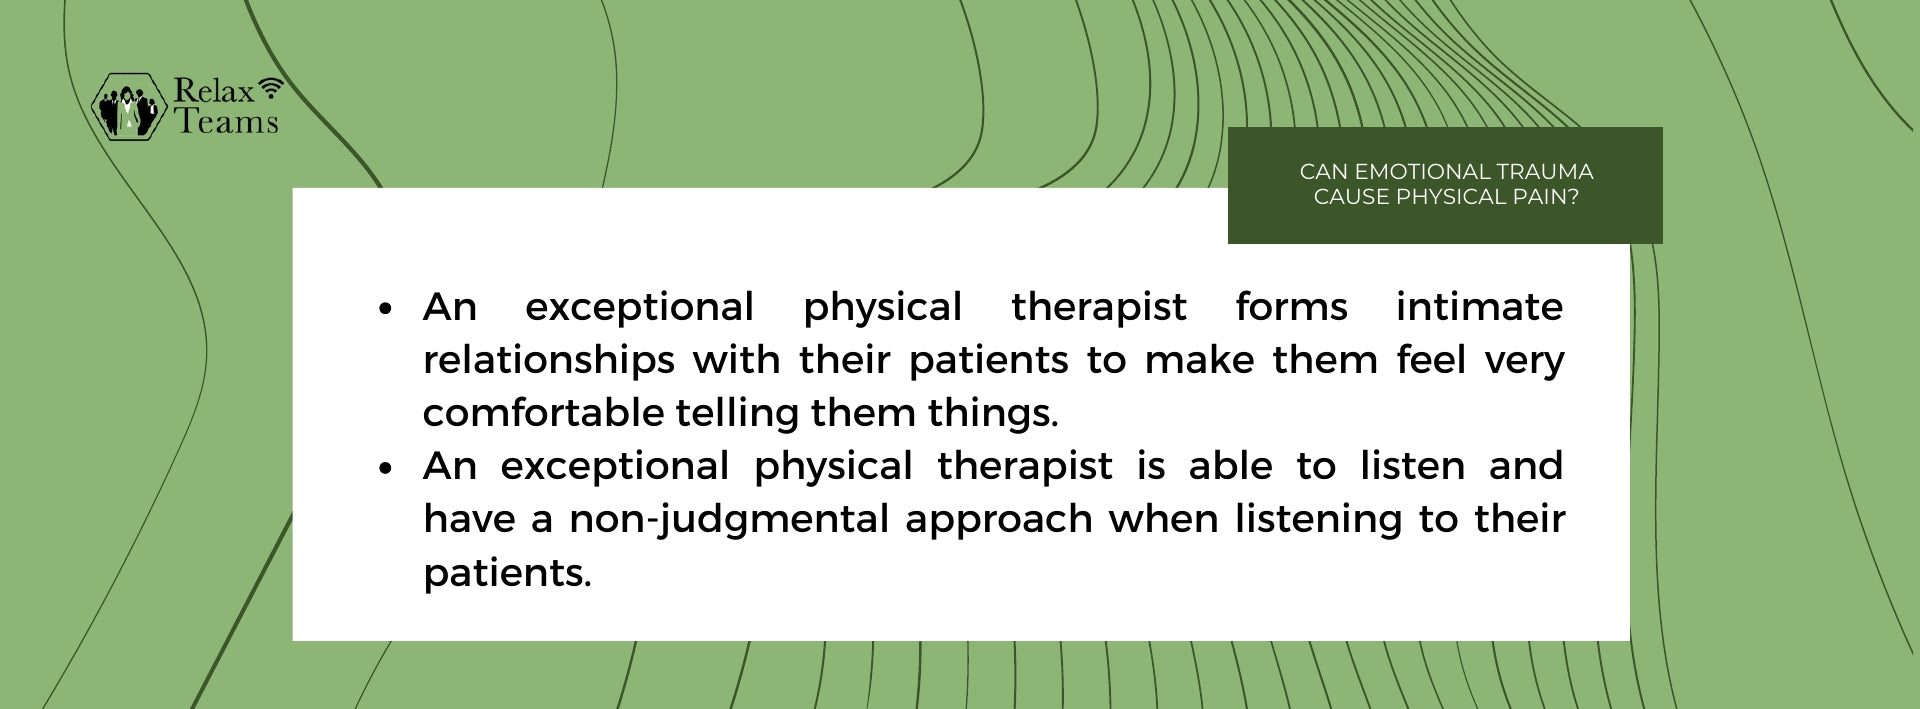 An exceptional physical therapist forms intimate relationships with their patients to make them feel very comfortable telling them things. 